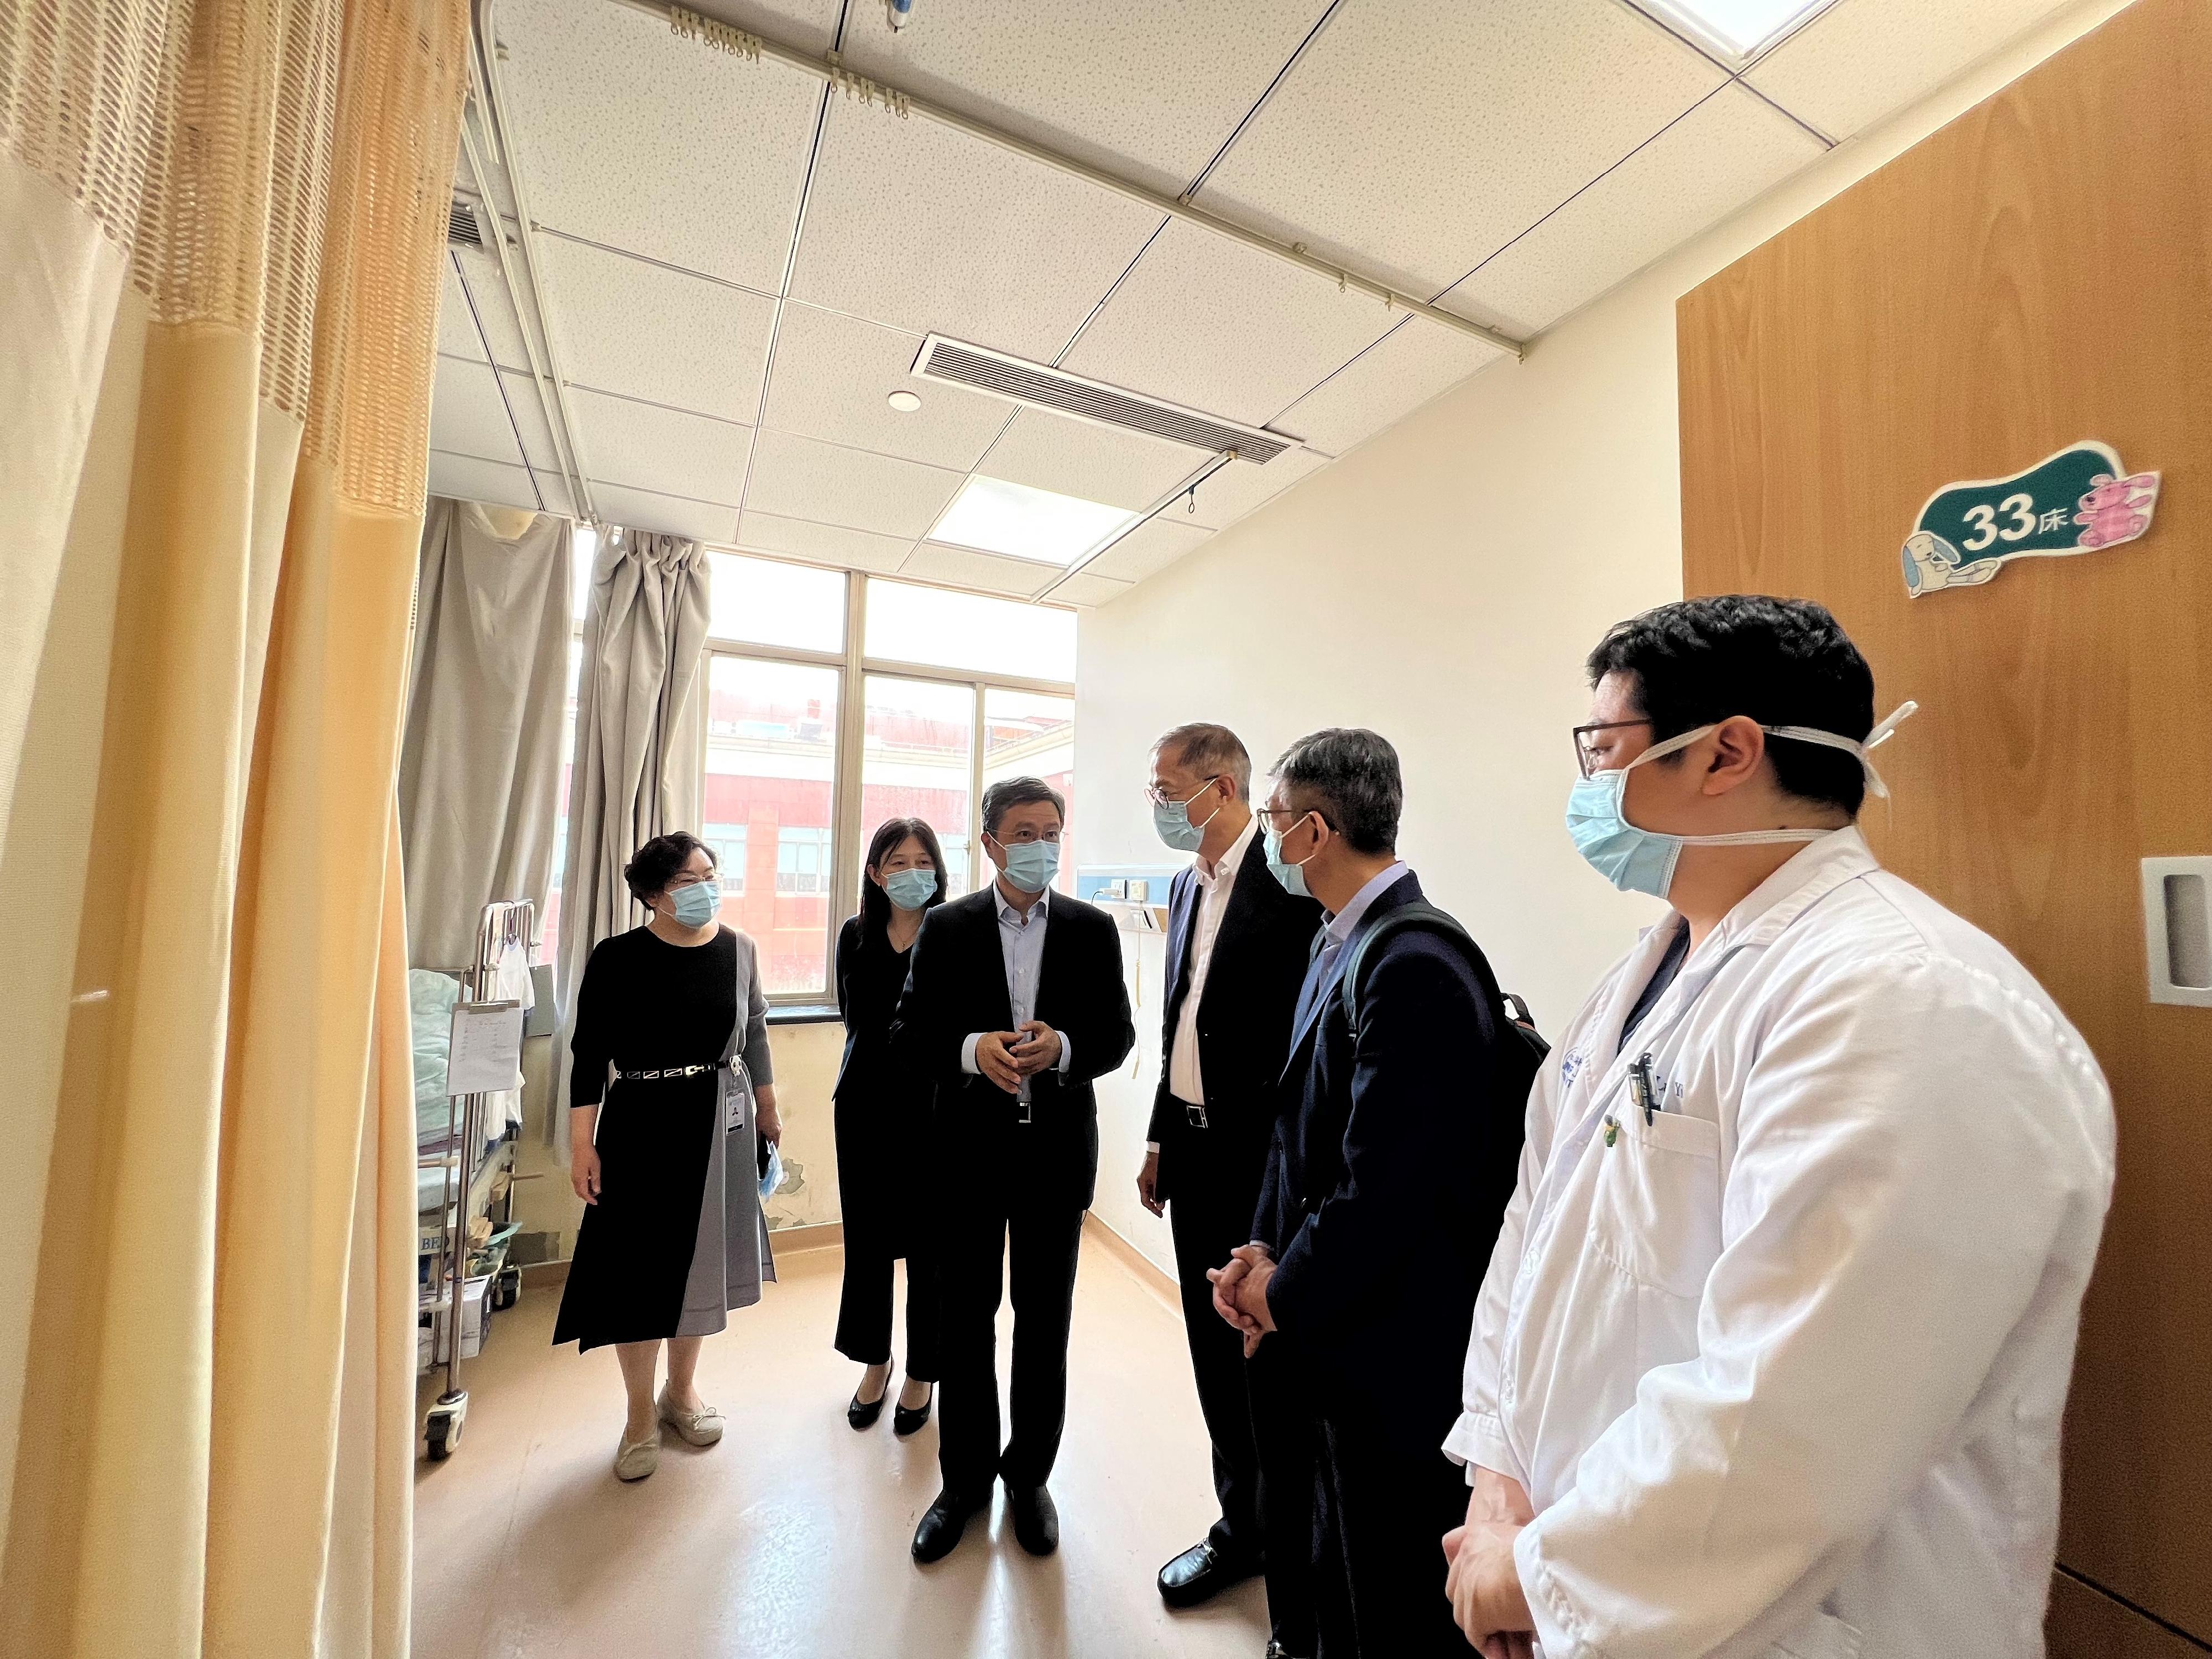 The Secretary for Health, Professor Lo Chung-mau (third right), visits the Pediatric Liver Surgery of the Renji Hospital affiliated to Shanghai Jiao Tong University School of Medicine this morning (June 9). Next to him are the President and Deputy Party Secretary of the hospital, Mr Xia Qiang (fourth right) and the Director of Cluster Services of the Hospital Authority, Dr Simon Tang (second right).